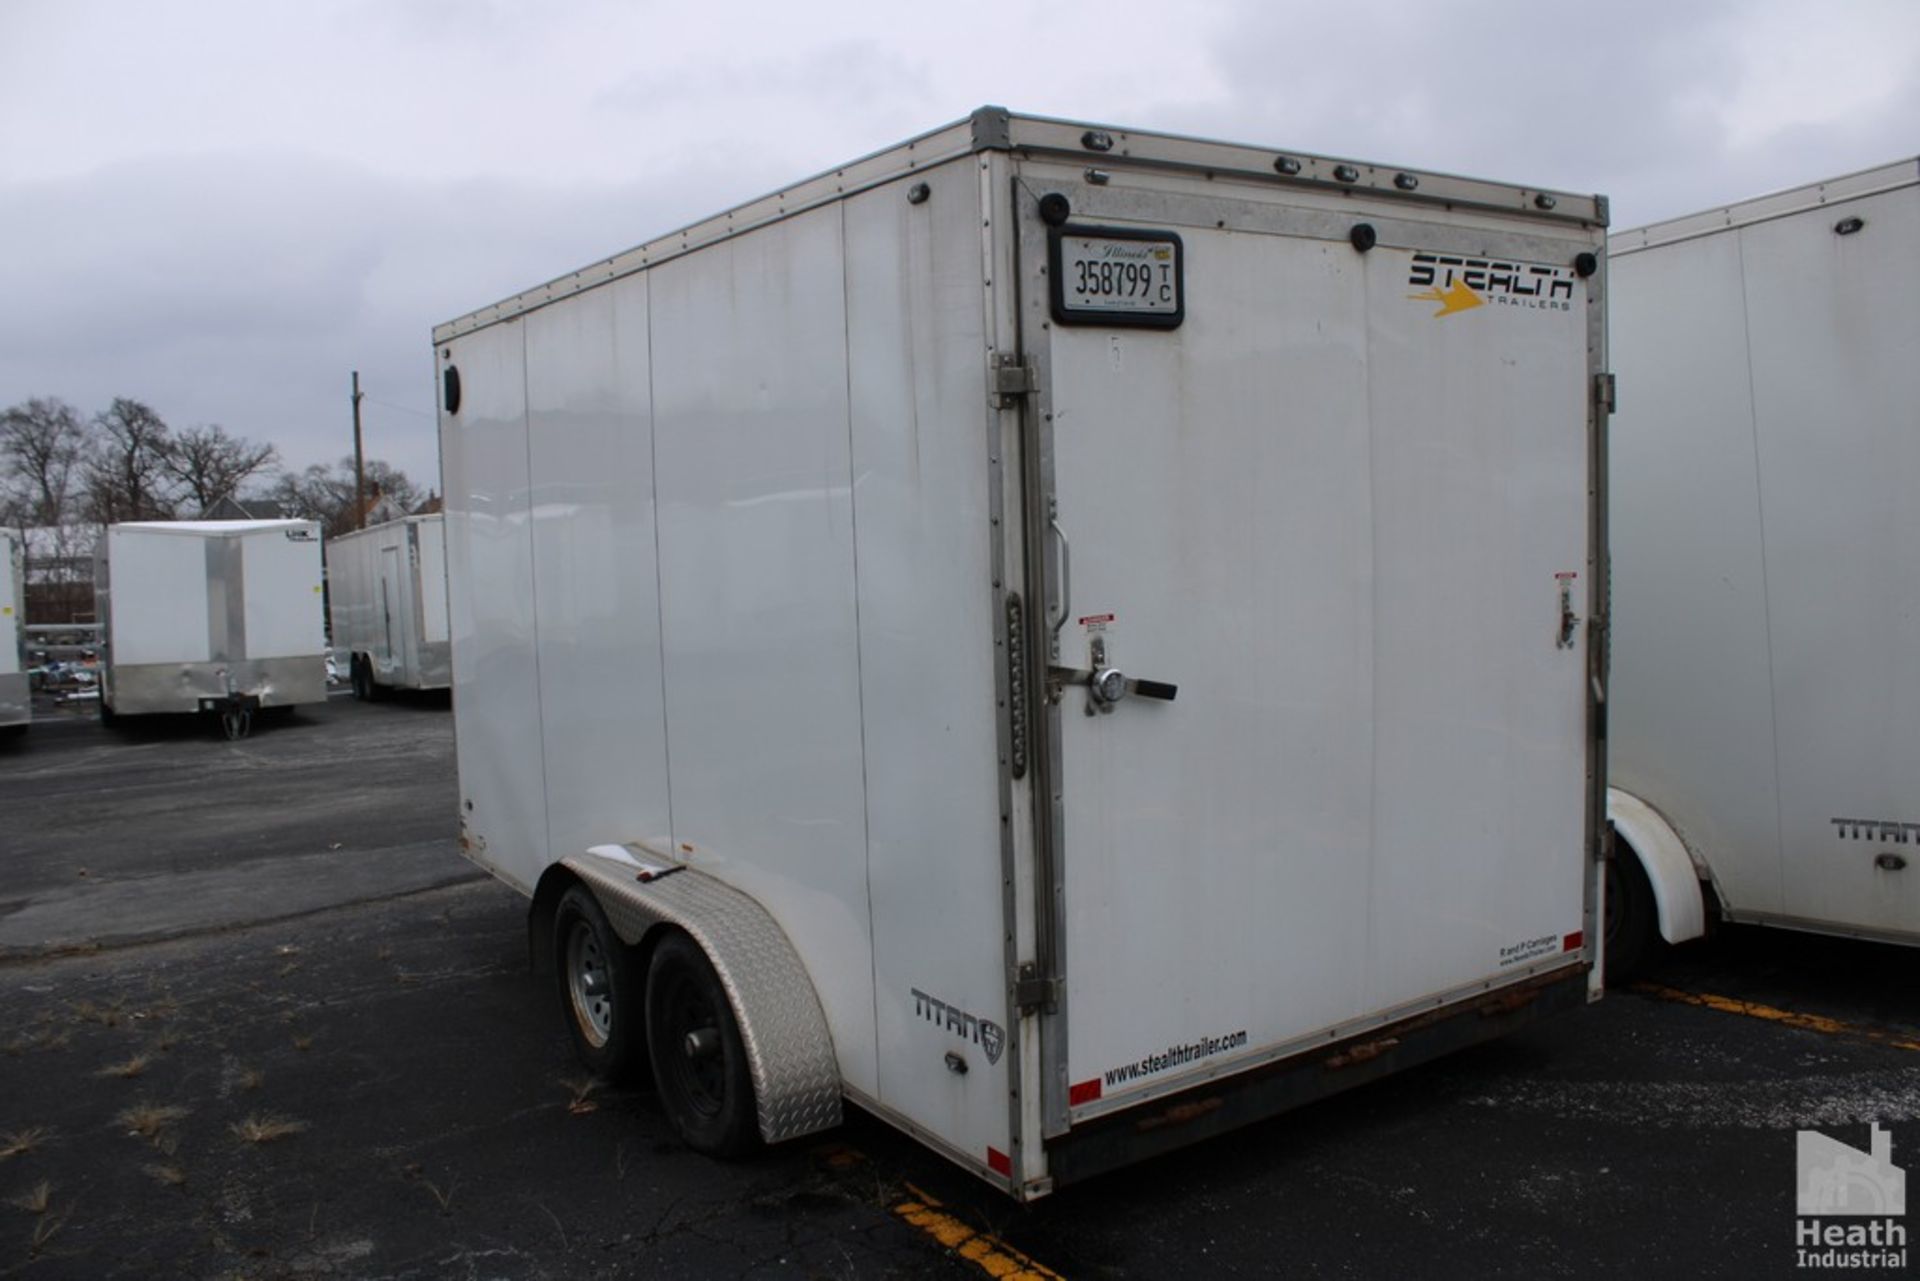 STEALTH 14’ ENCLOSED TRAILER, VIN: 52LBE1421LE077652 (NEW 2020), WITH SIDE DOOR, DROP DOWN BACK - Image 2 of 4